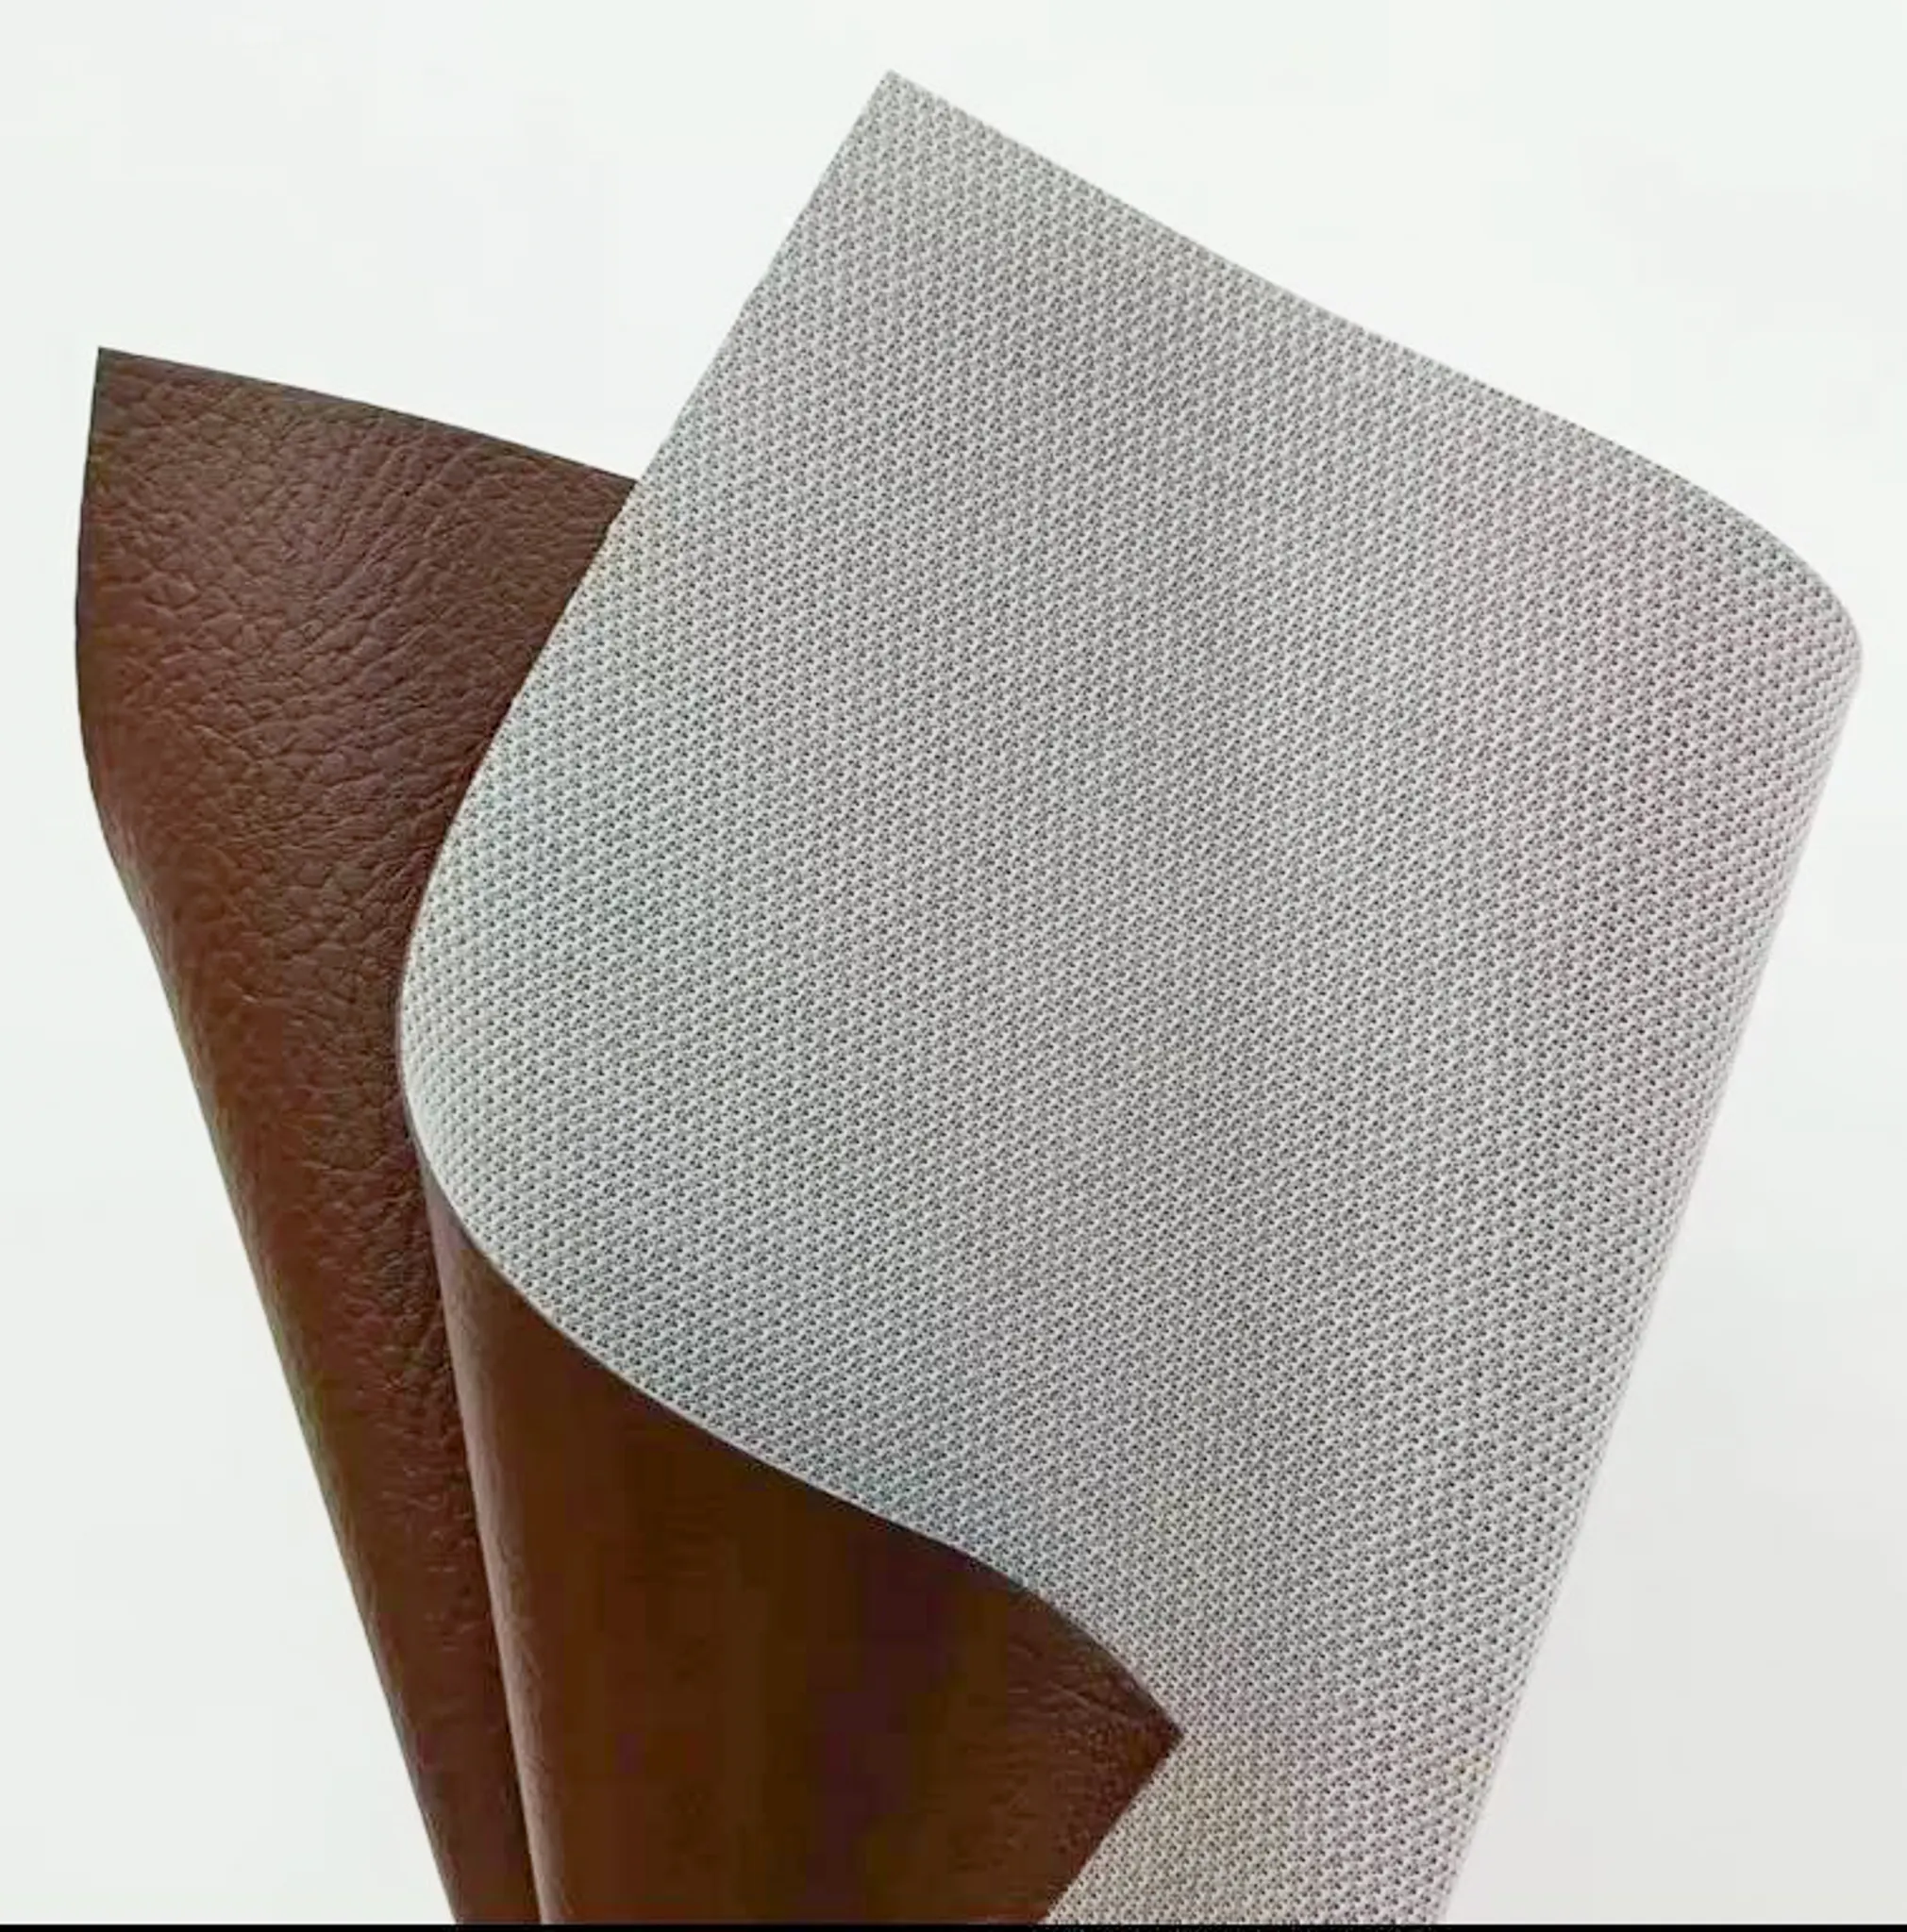 PVC Leather for Car Interior Decorative Use made from Viet Nam